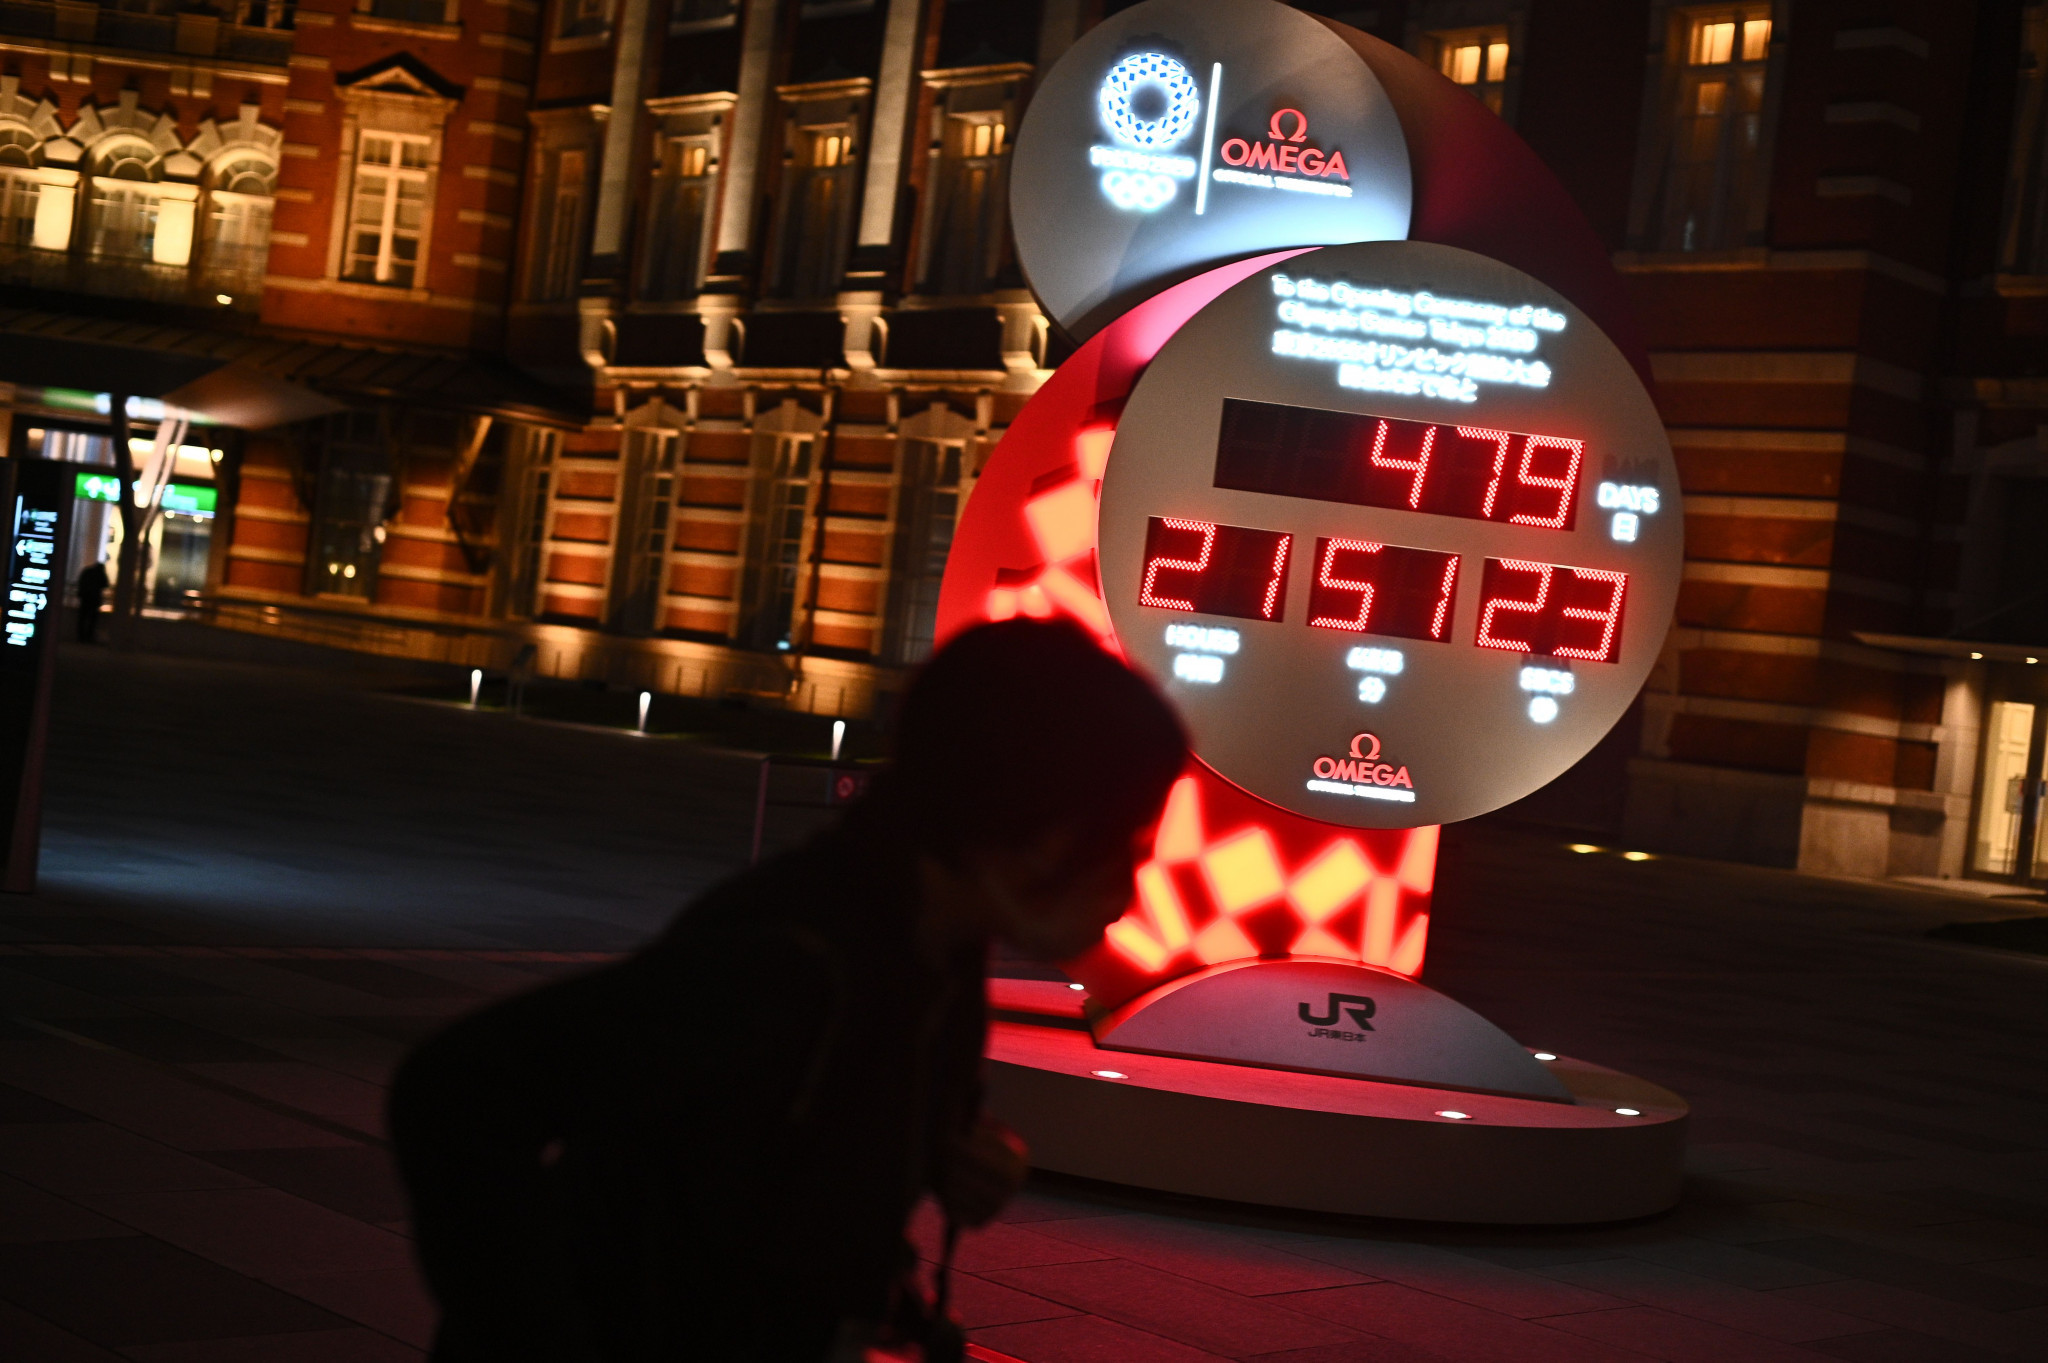 There is a new date for this clock to count down to ©Getty Images